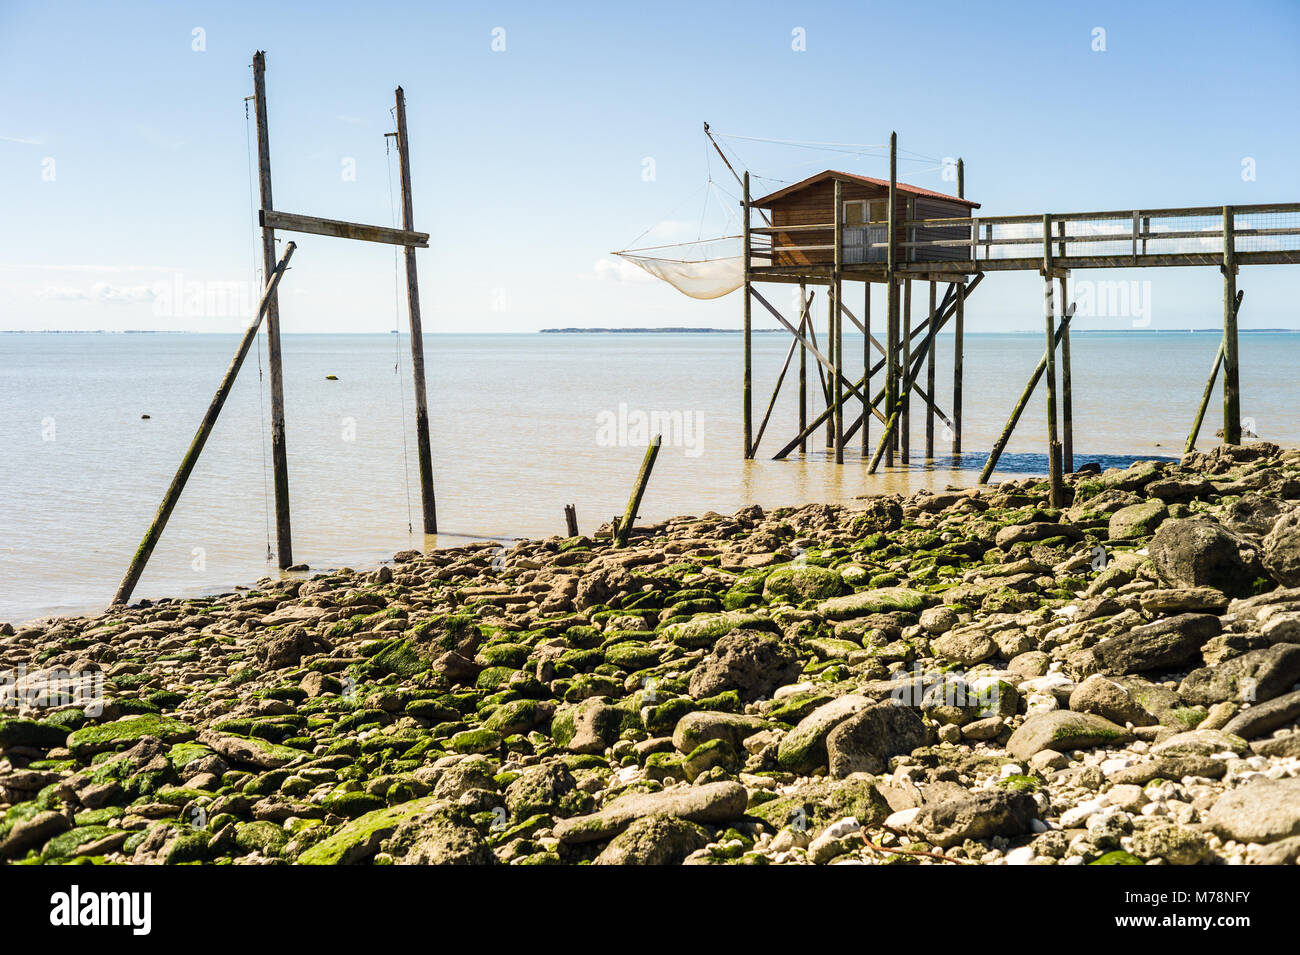 Hut on stilts at low tide for square dipping net fishing, a traditional fishery on the french Atlantic shore. Stock Photo